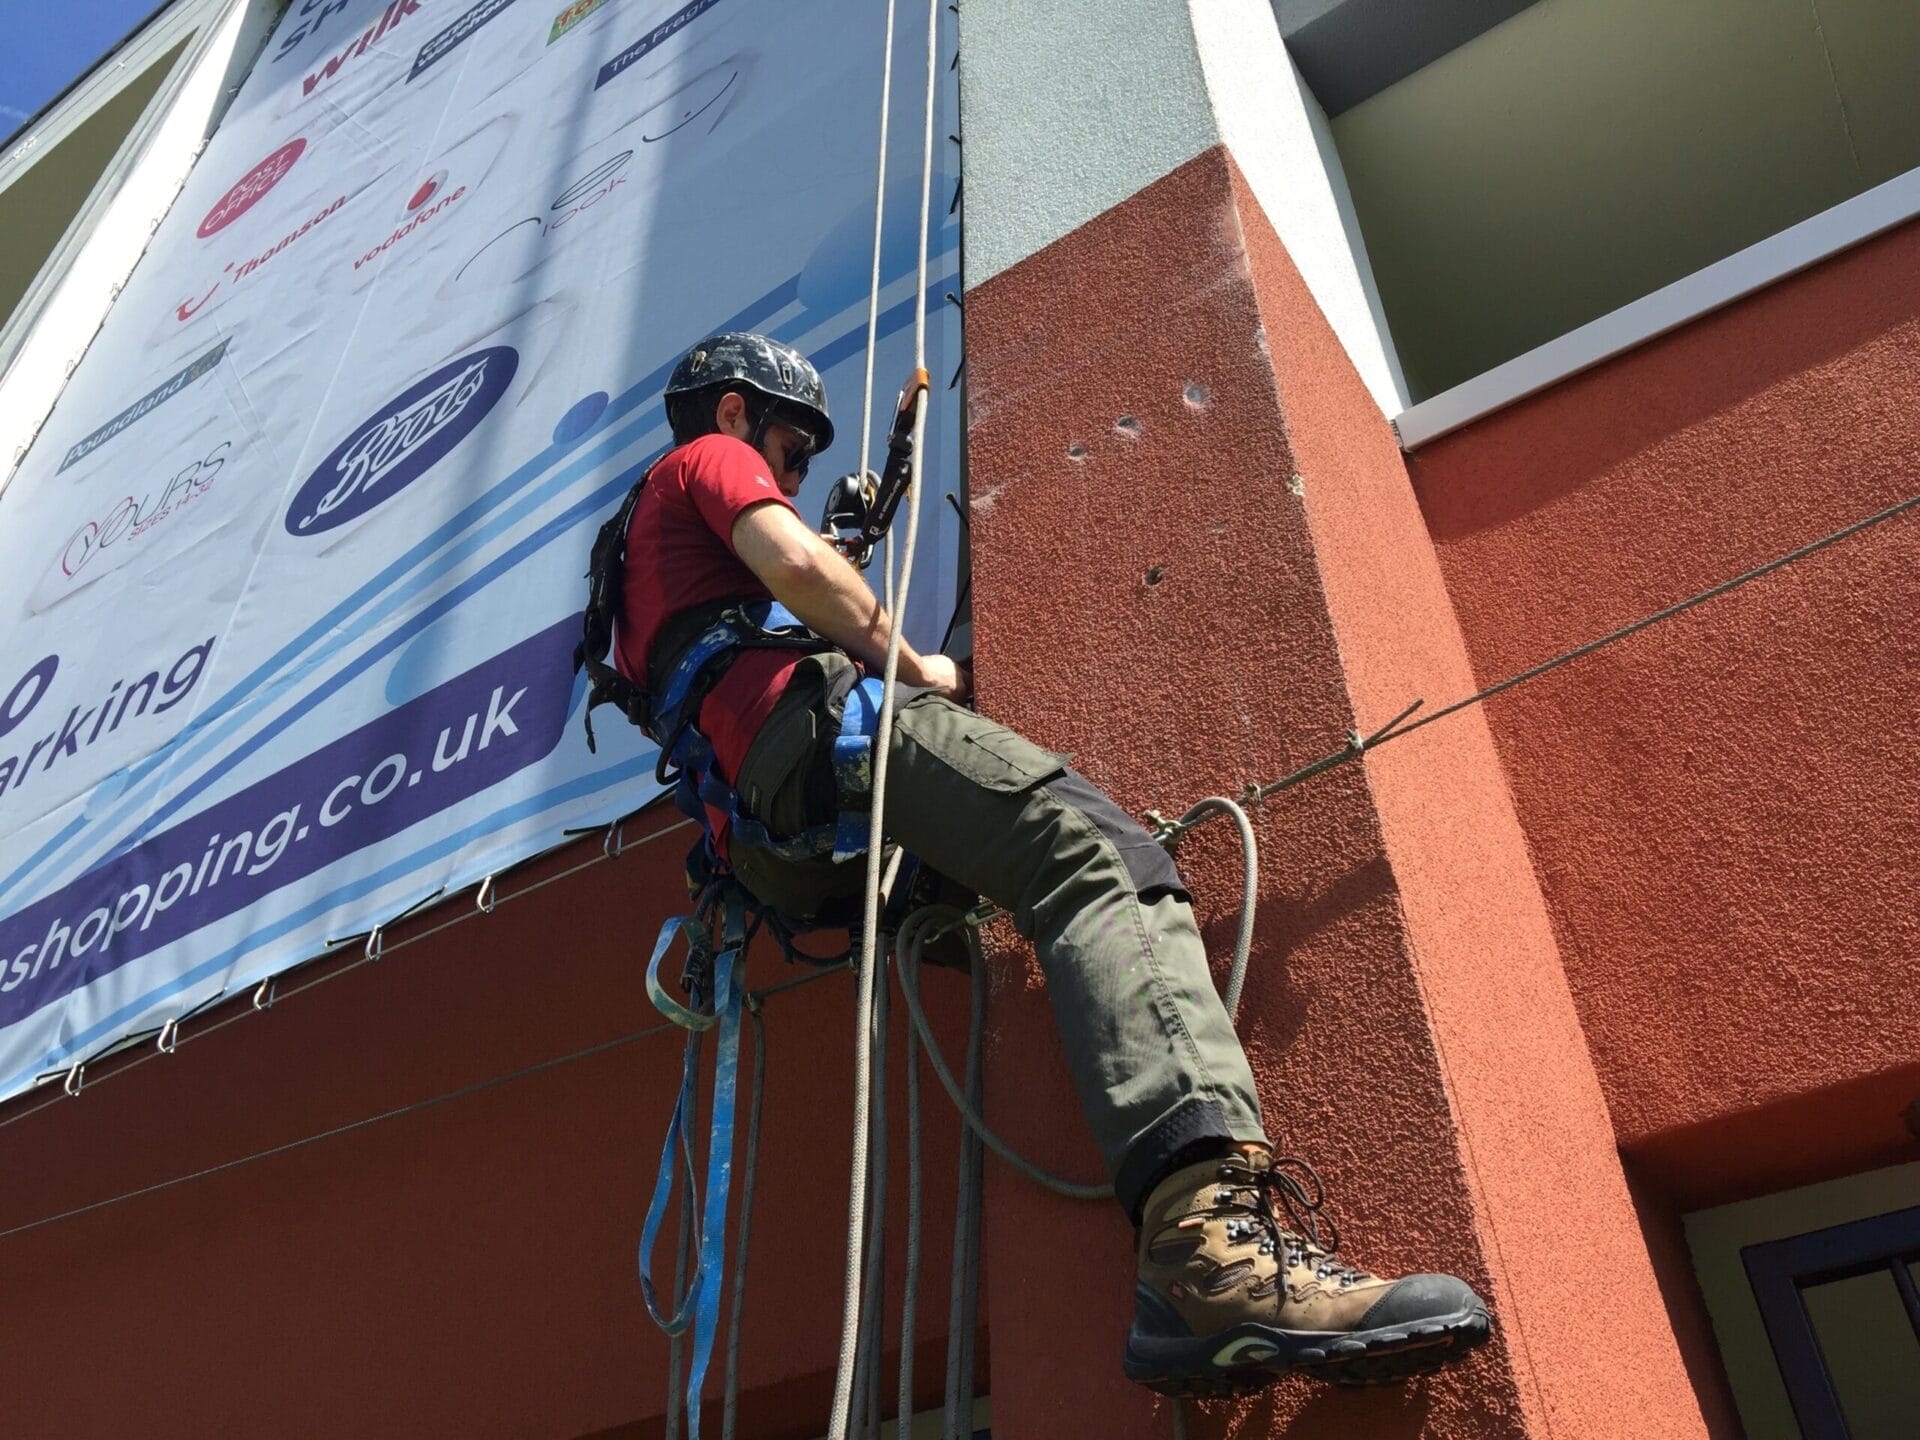 A man scaling the side of a building for an installation project.